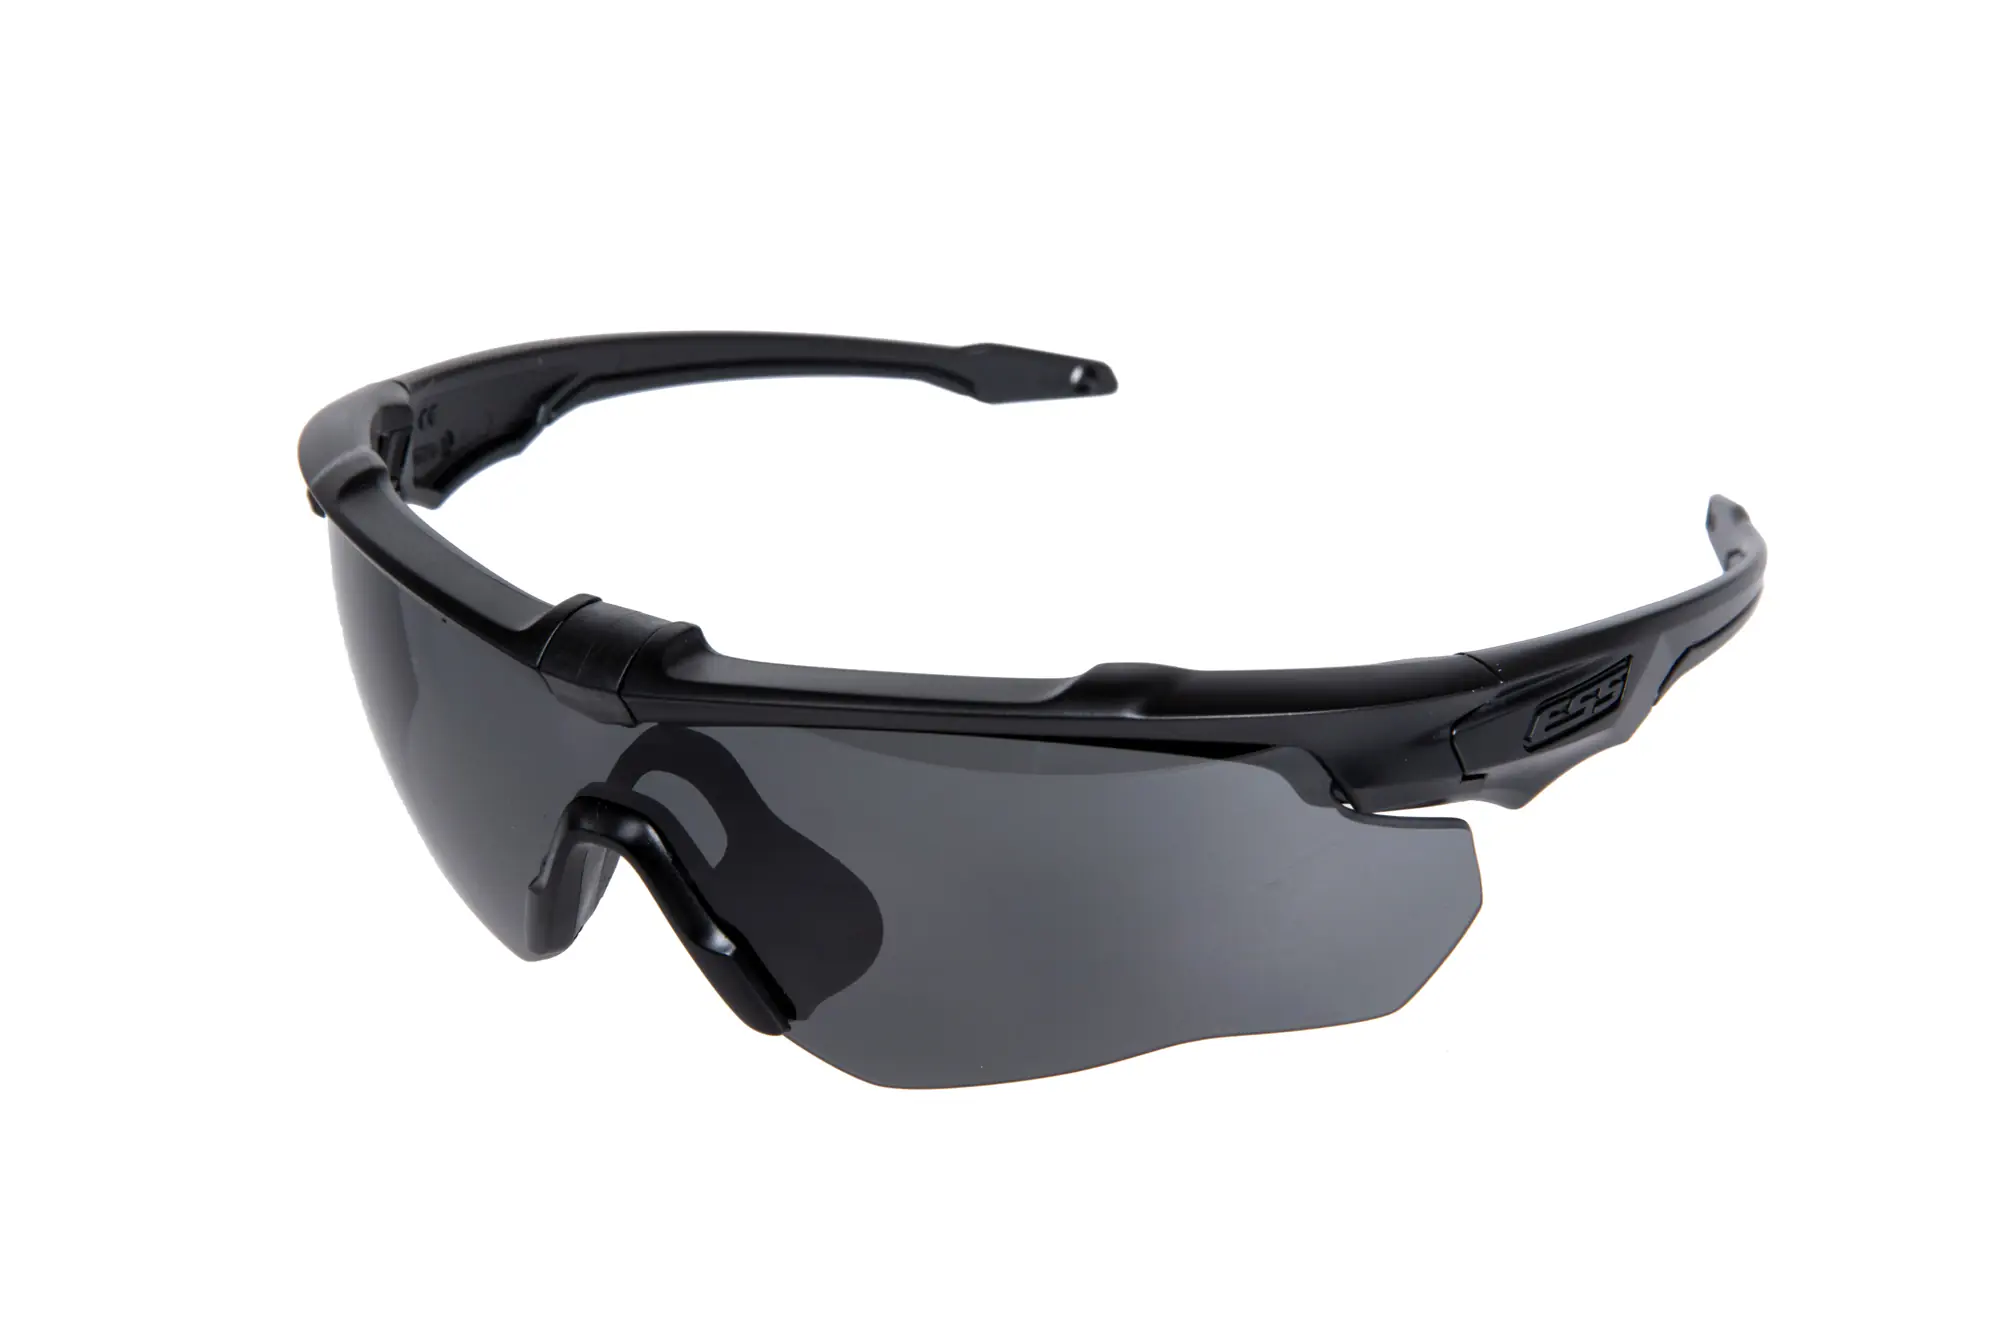 Lunettes de protection Crossblade One Smoke Gray - Teintées